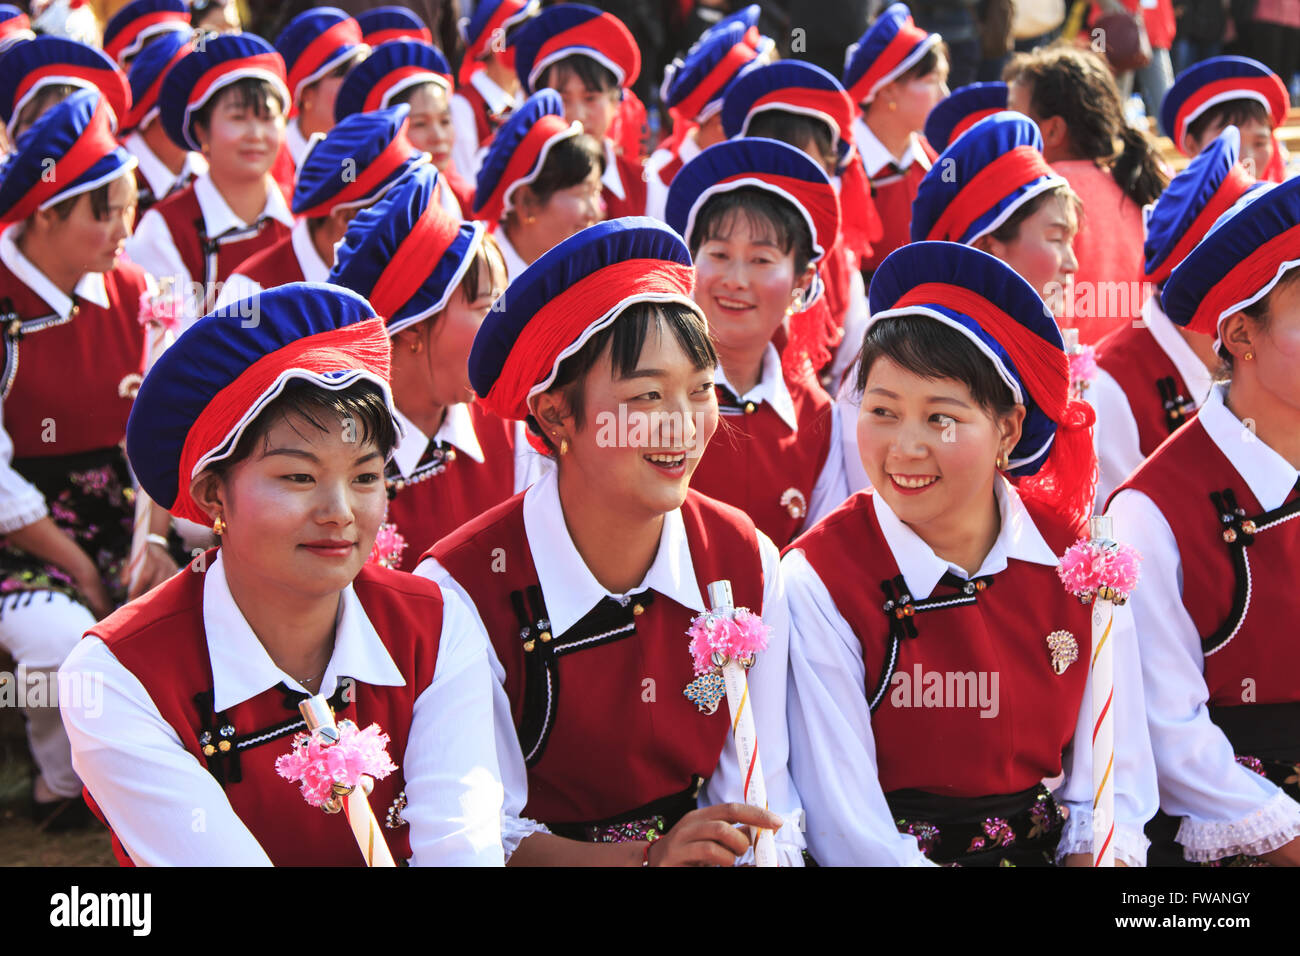 Heqing, China - March 15, 2016: Chinese girl in traditional Bai clothing during the Heqing Qifeng Pear Flower festival Stock Photo